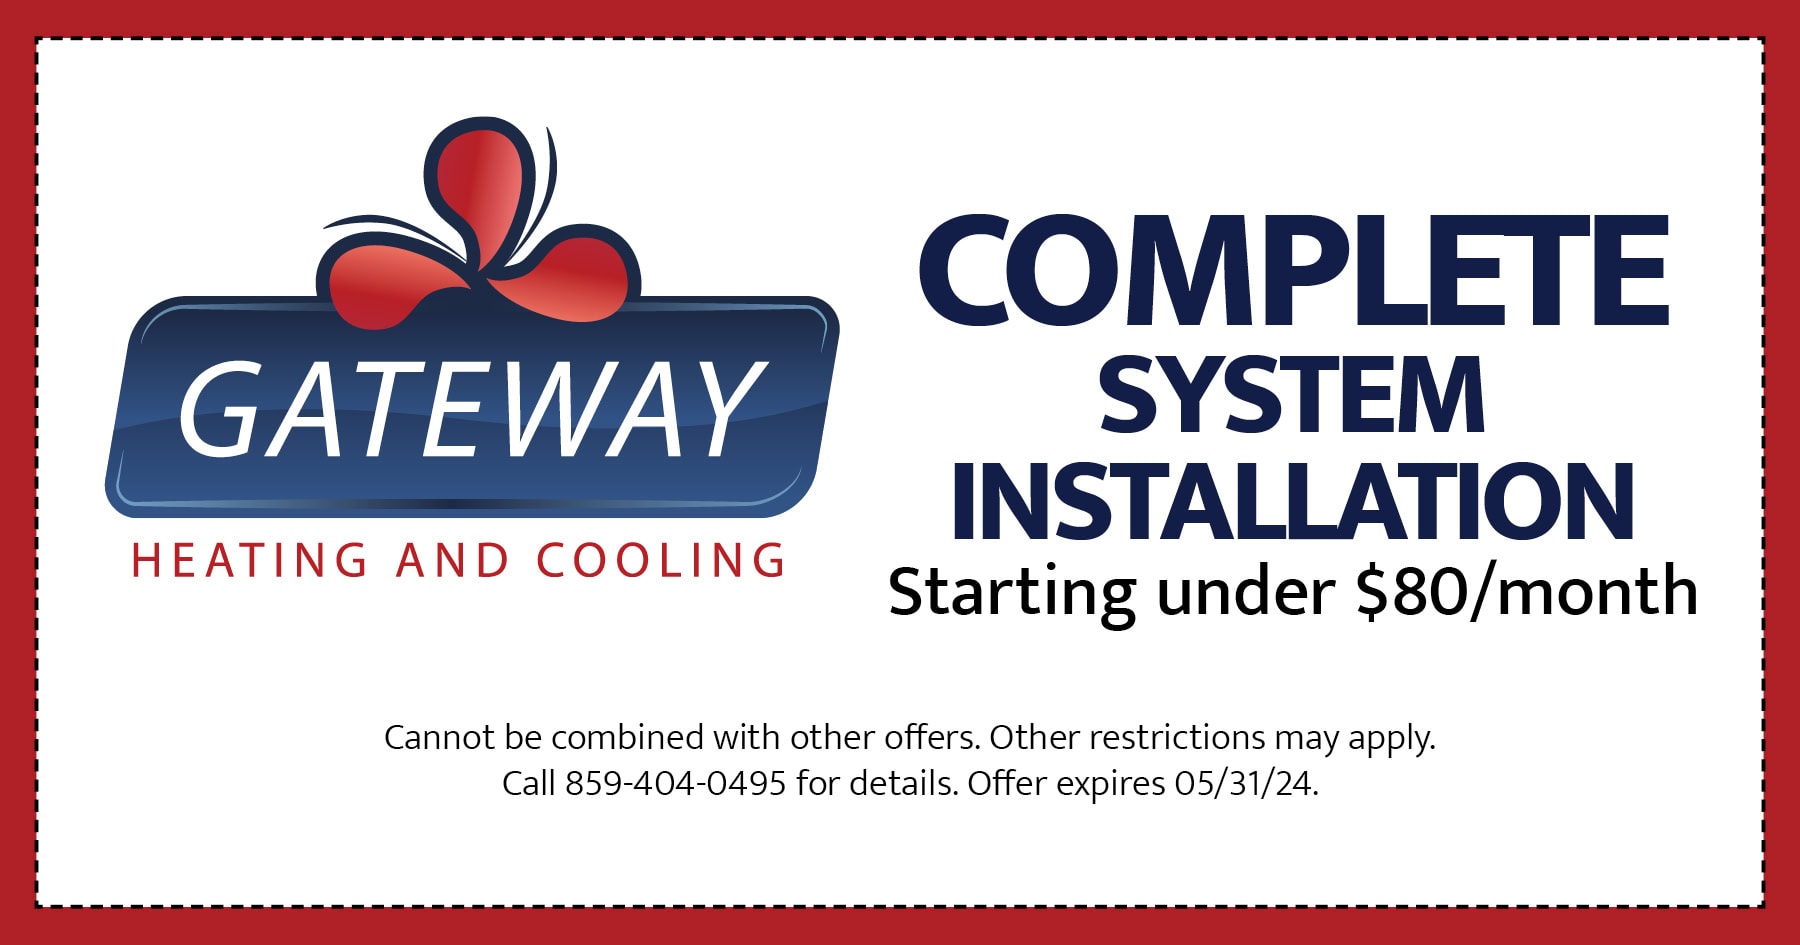 Complete system installation. Starting under $80 month. Cannot be combined with other offers. Other restrictions may apply. Call 859 404 0495 for details. Offer expires 05/31/2024.